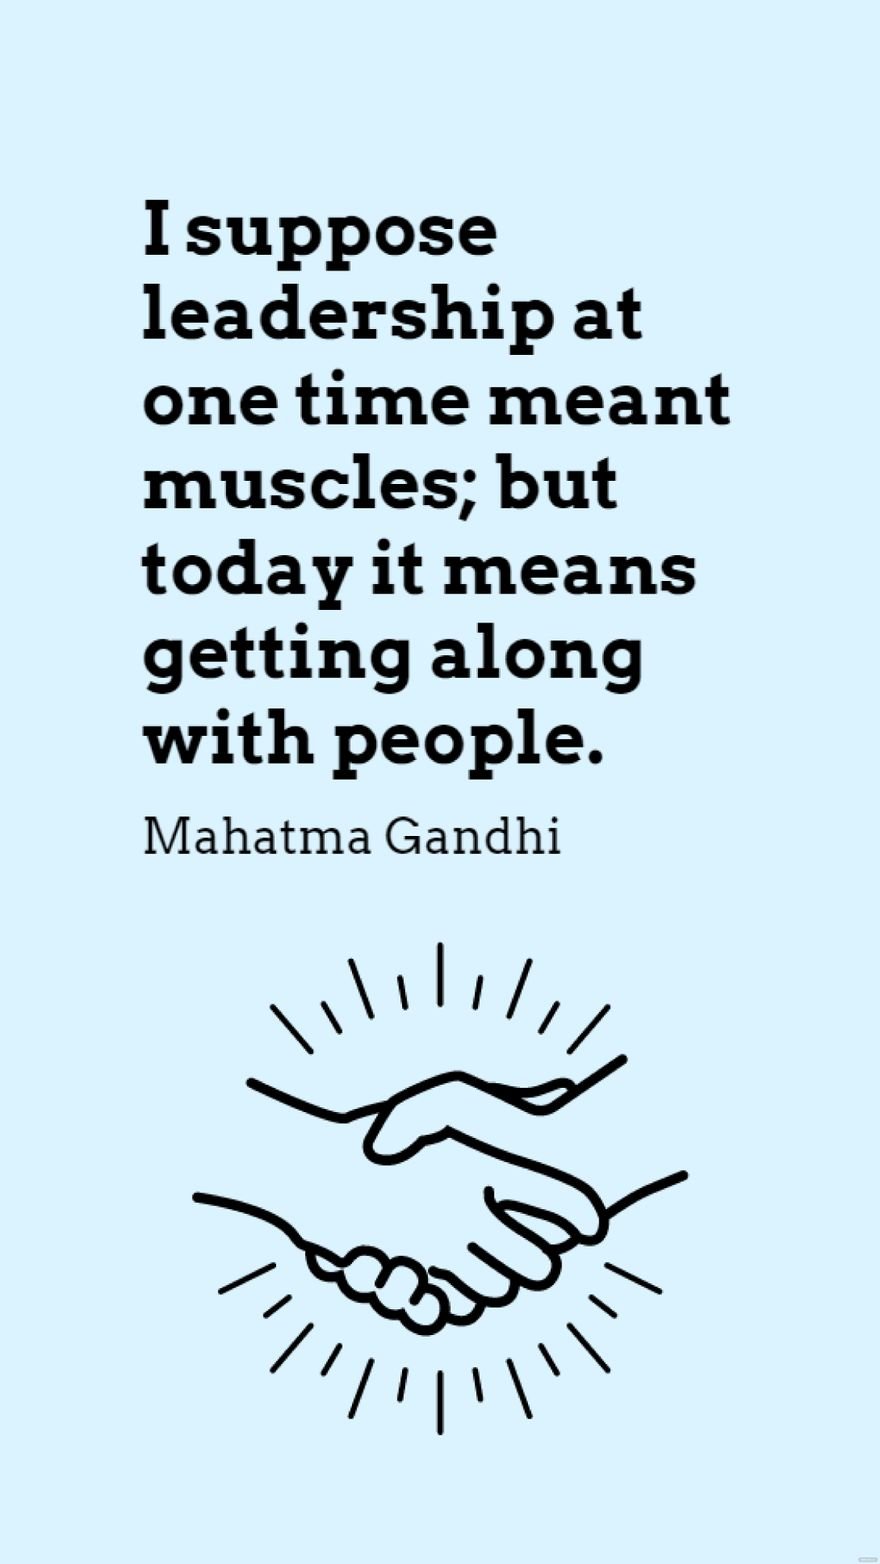 Mahatma Gandhi - I suppose leadership at one time meant muscles; but today it means getting along with people.